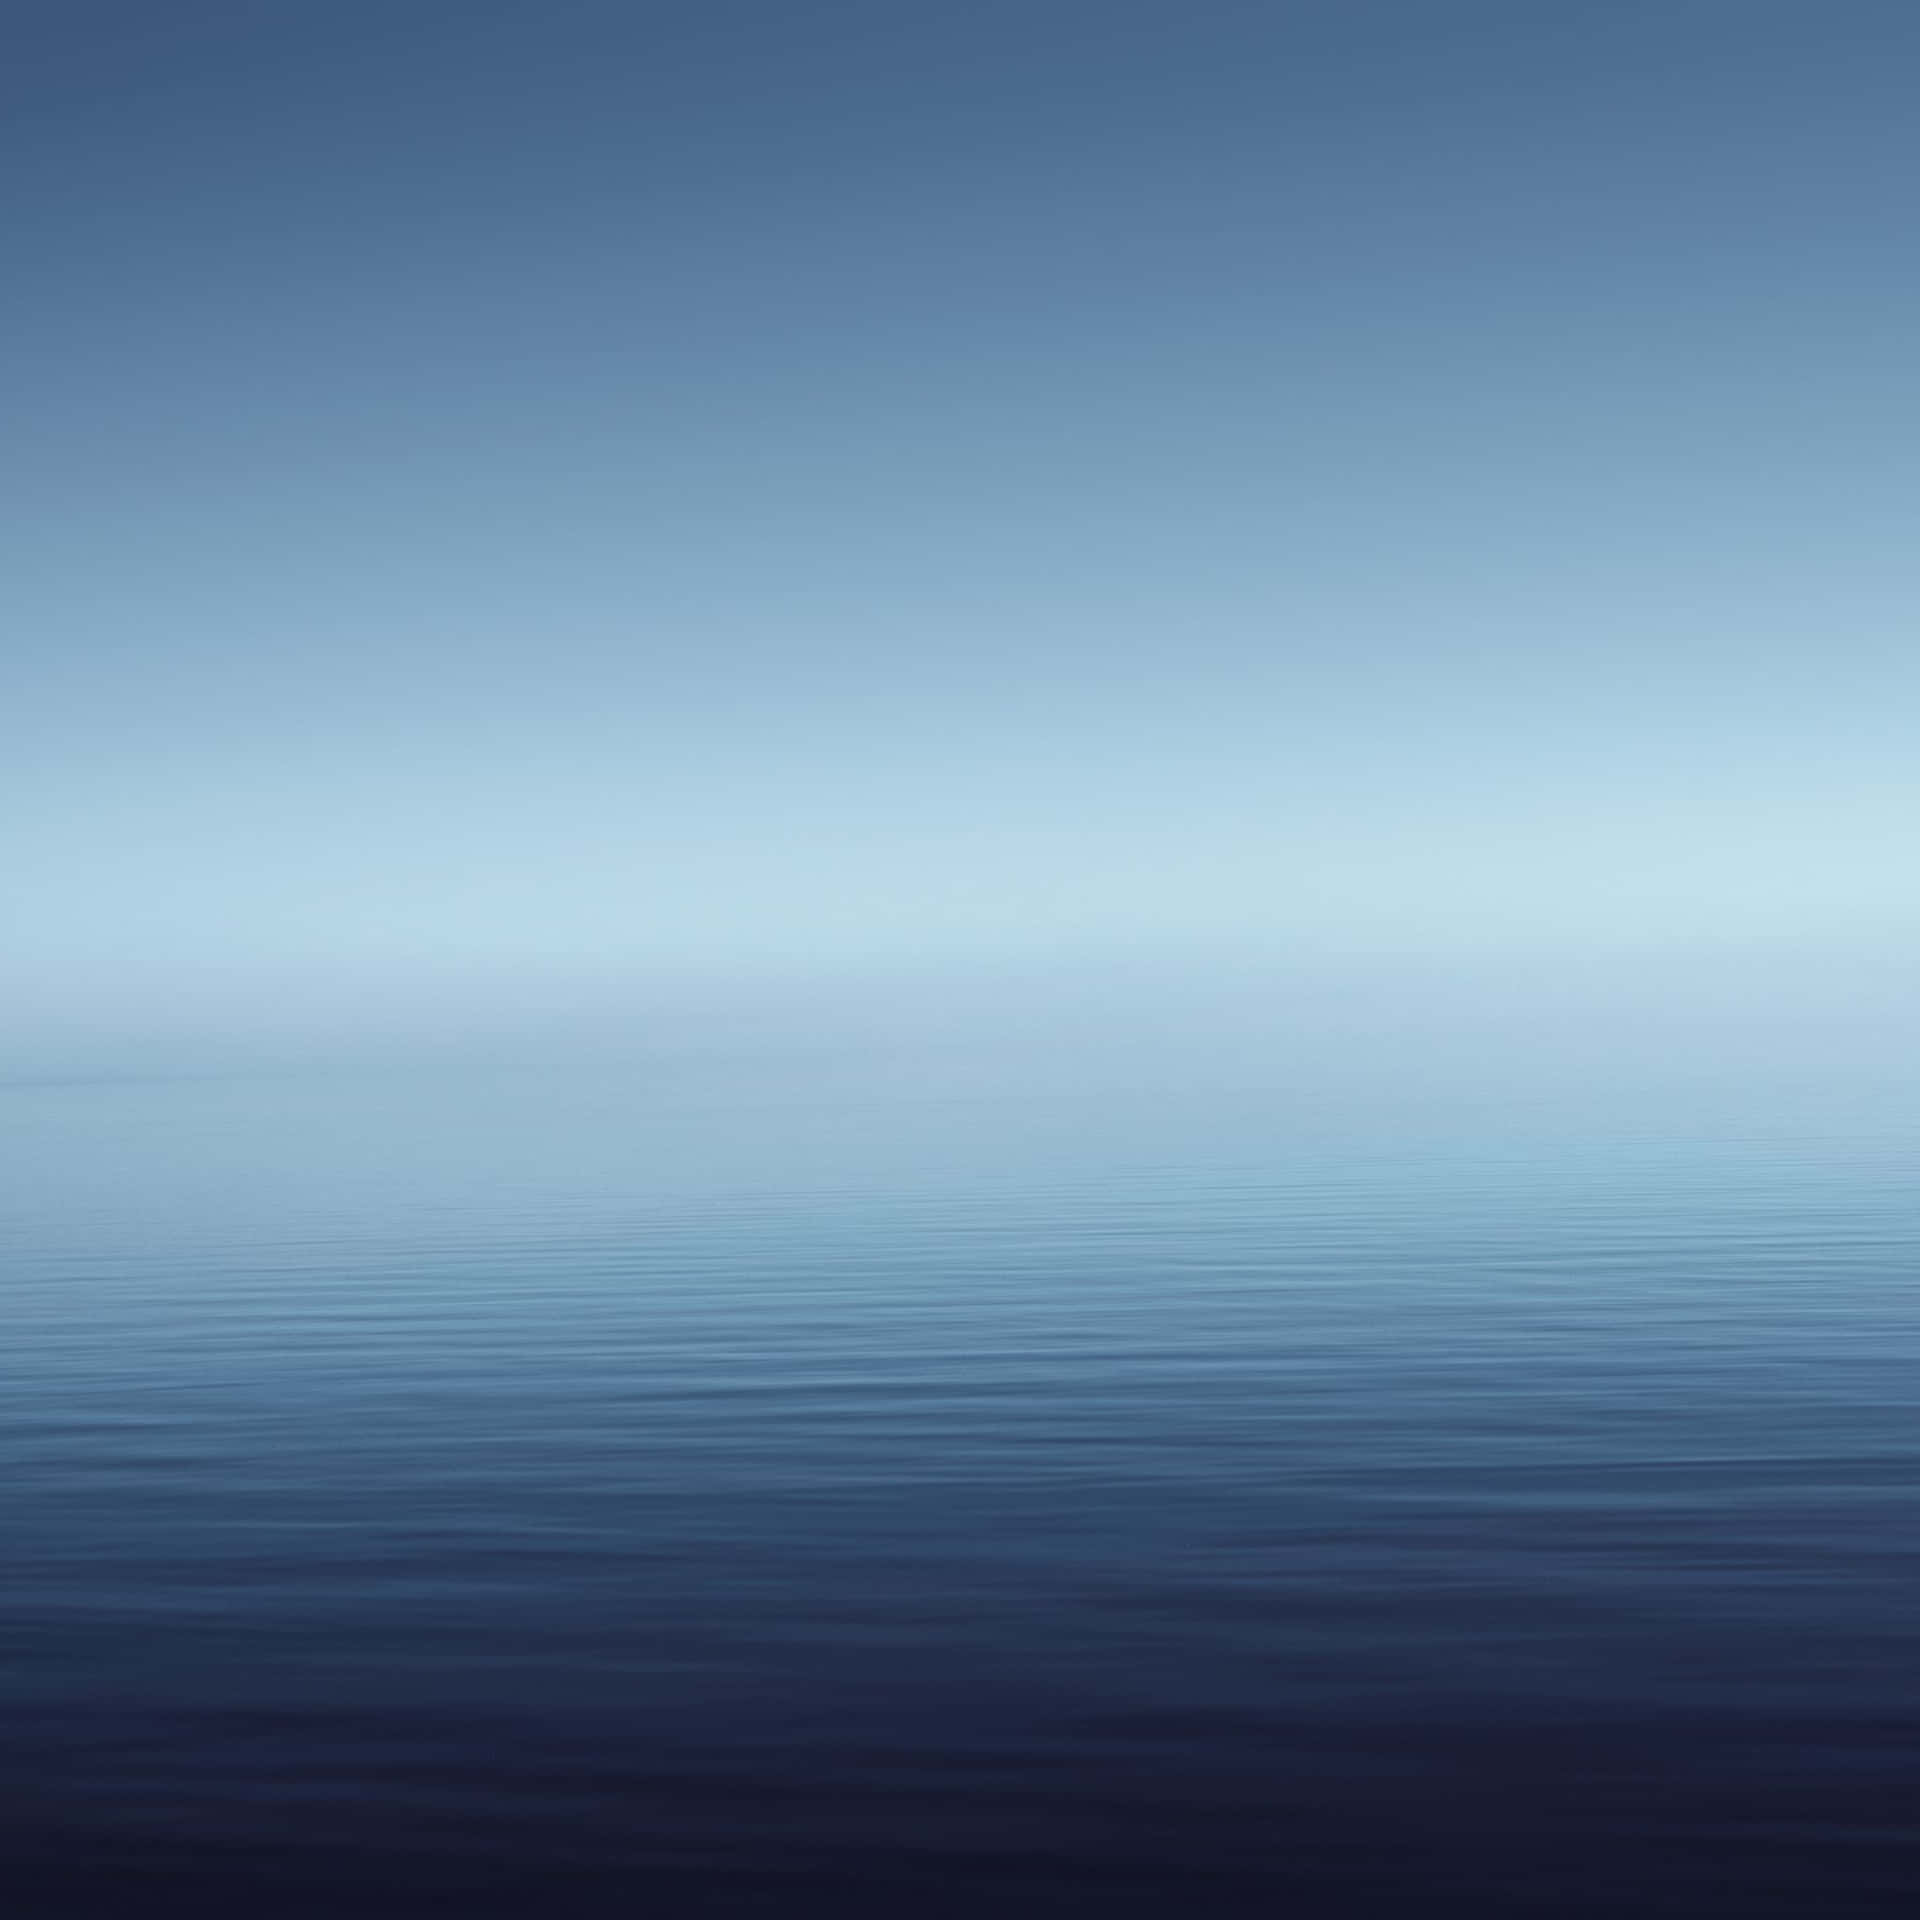 Calm Waters For Ios 3 Wallpaper